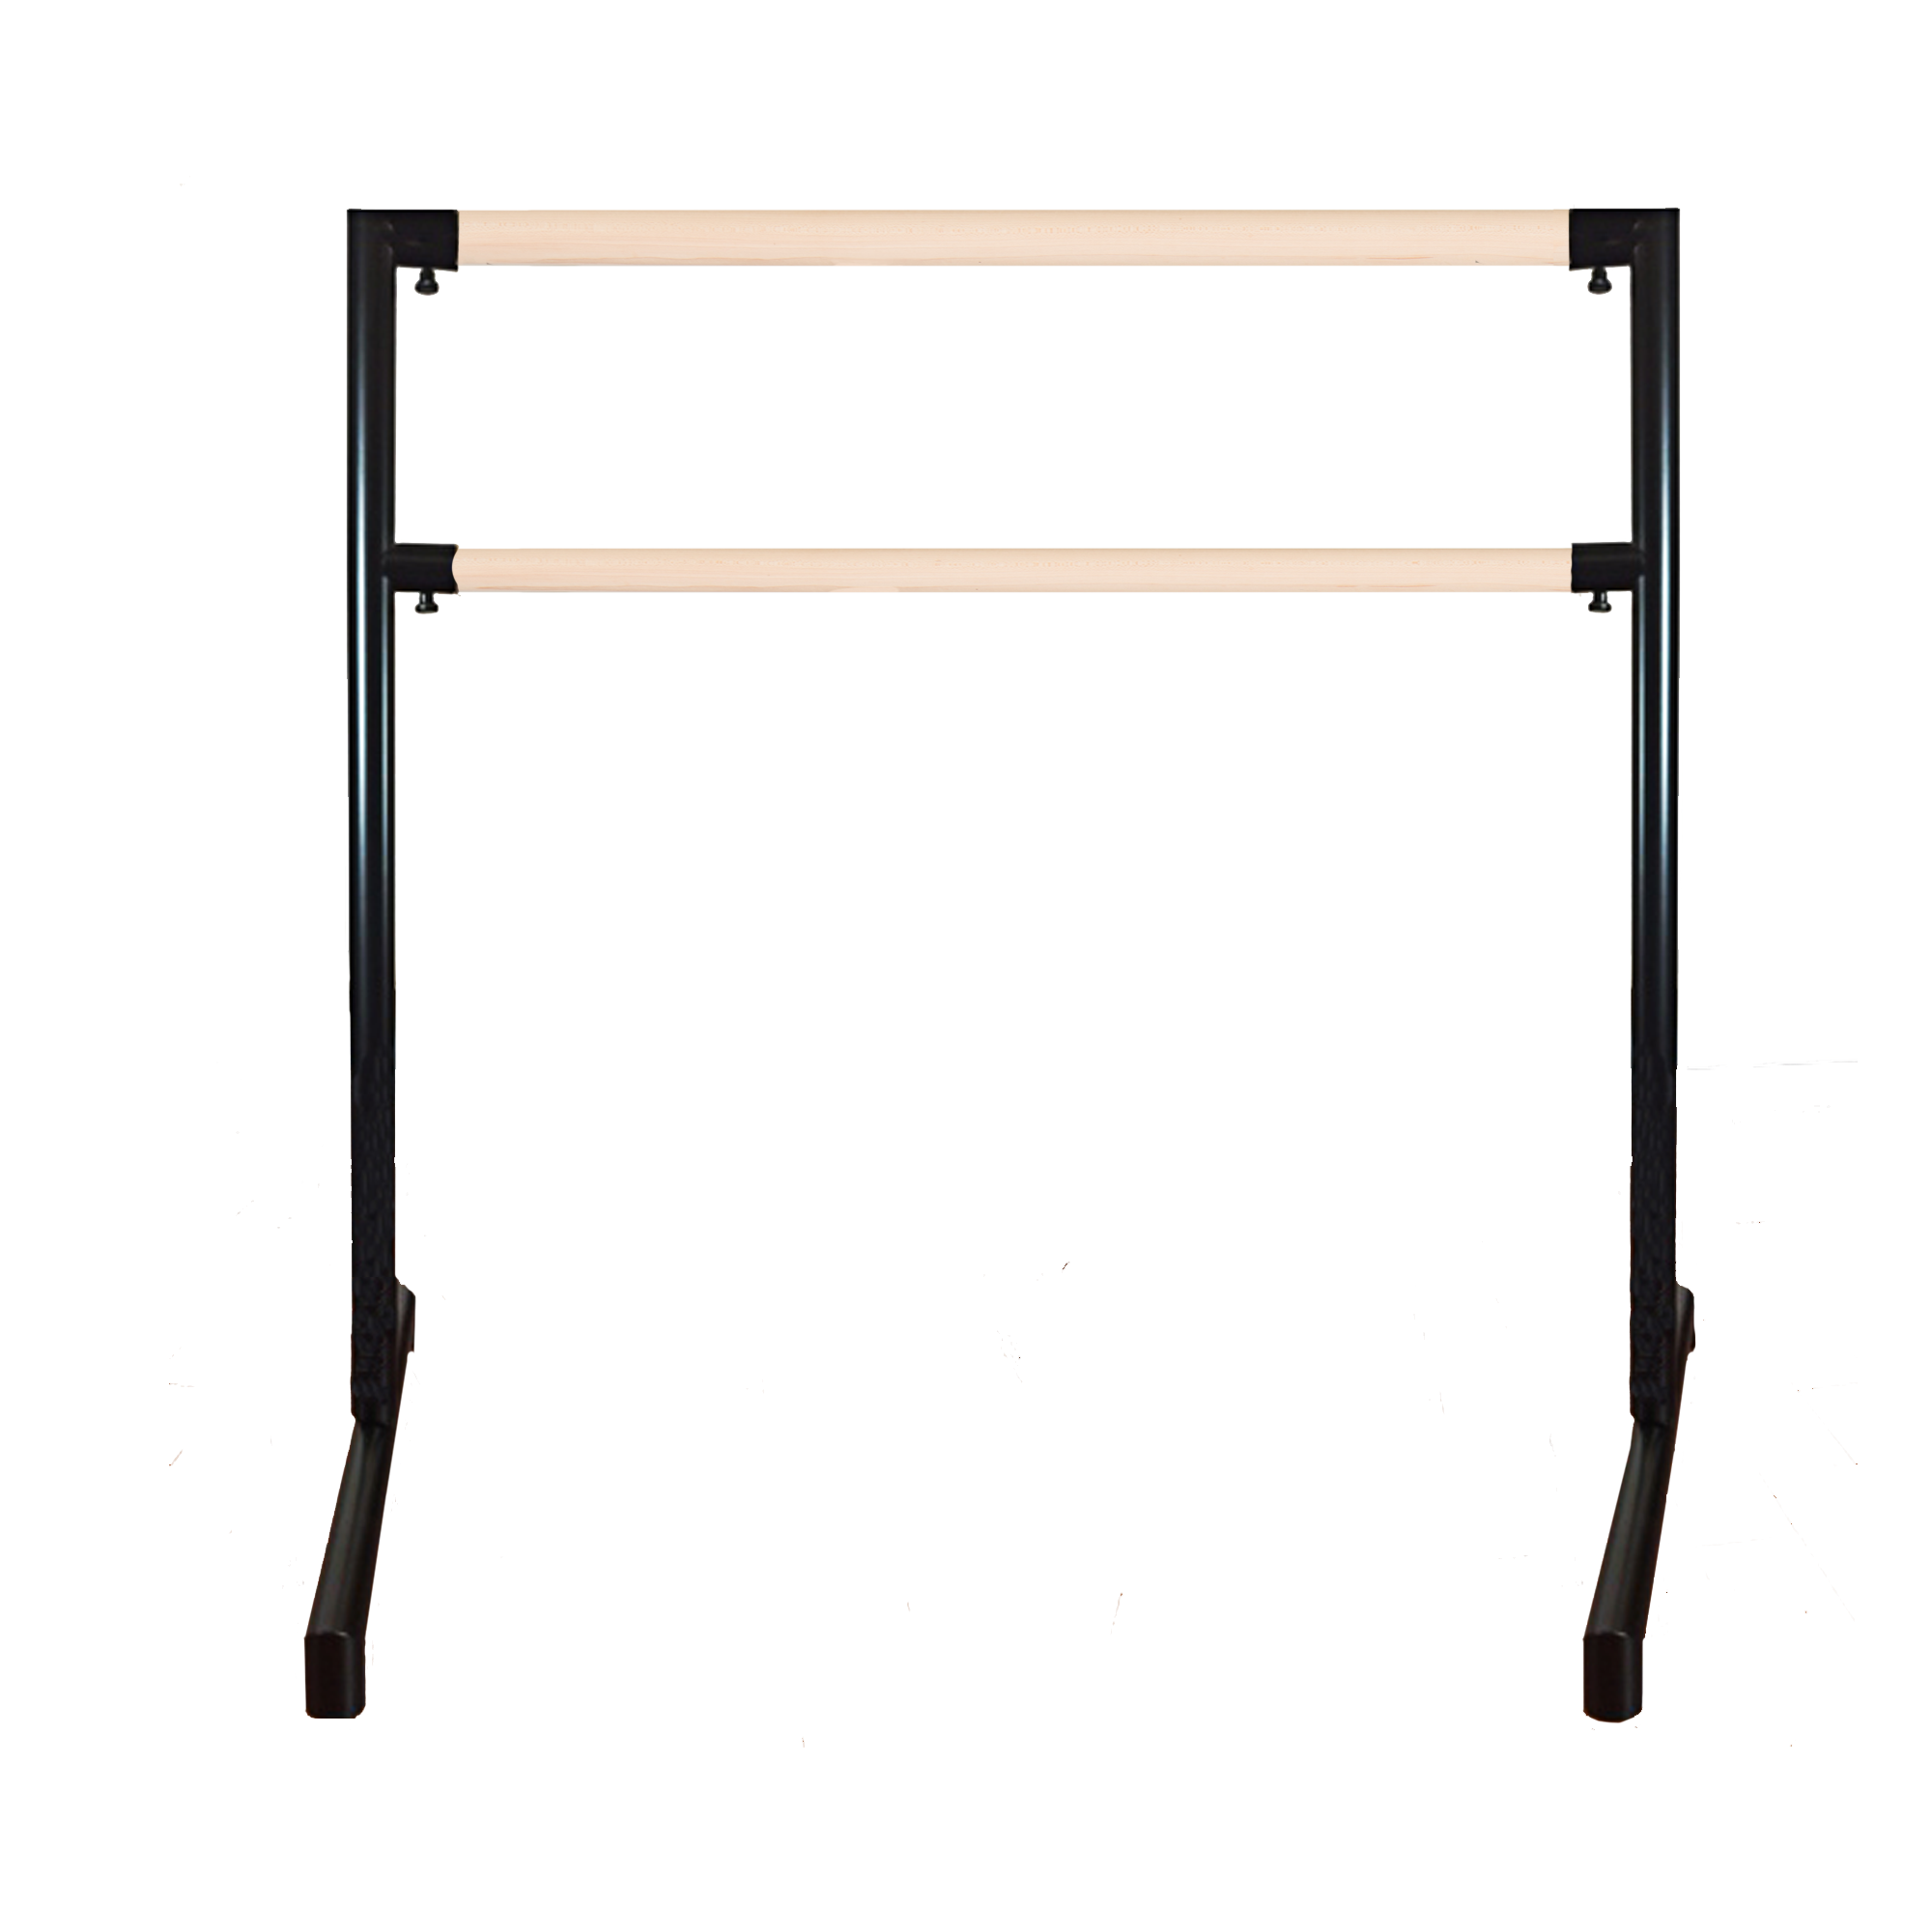  Get Out! Ballet Barre Portable for Home or Studio - Ballet Bar  Portable Dance Barre, Ballet Barre Freestanding Equipment : Sports &  Outdoors